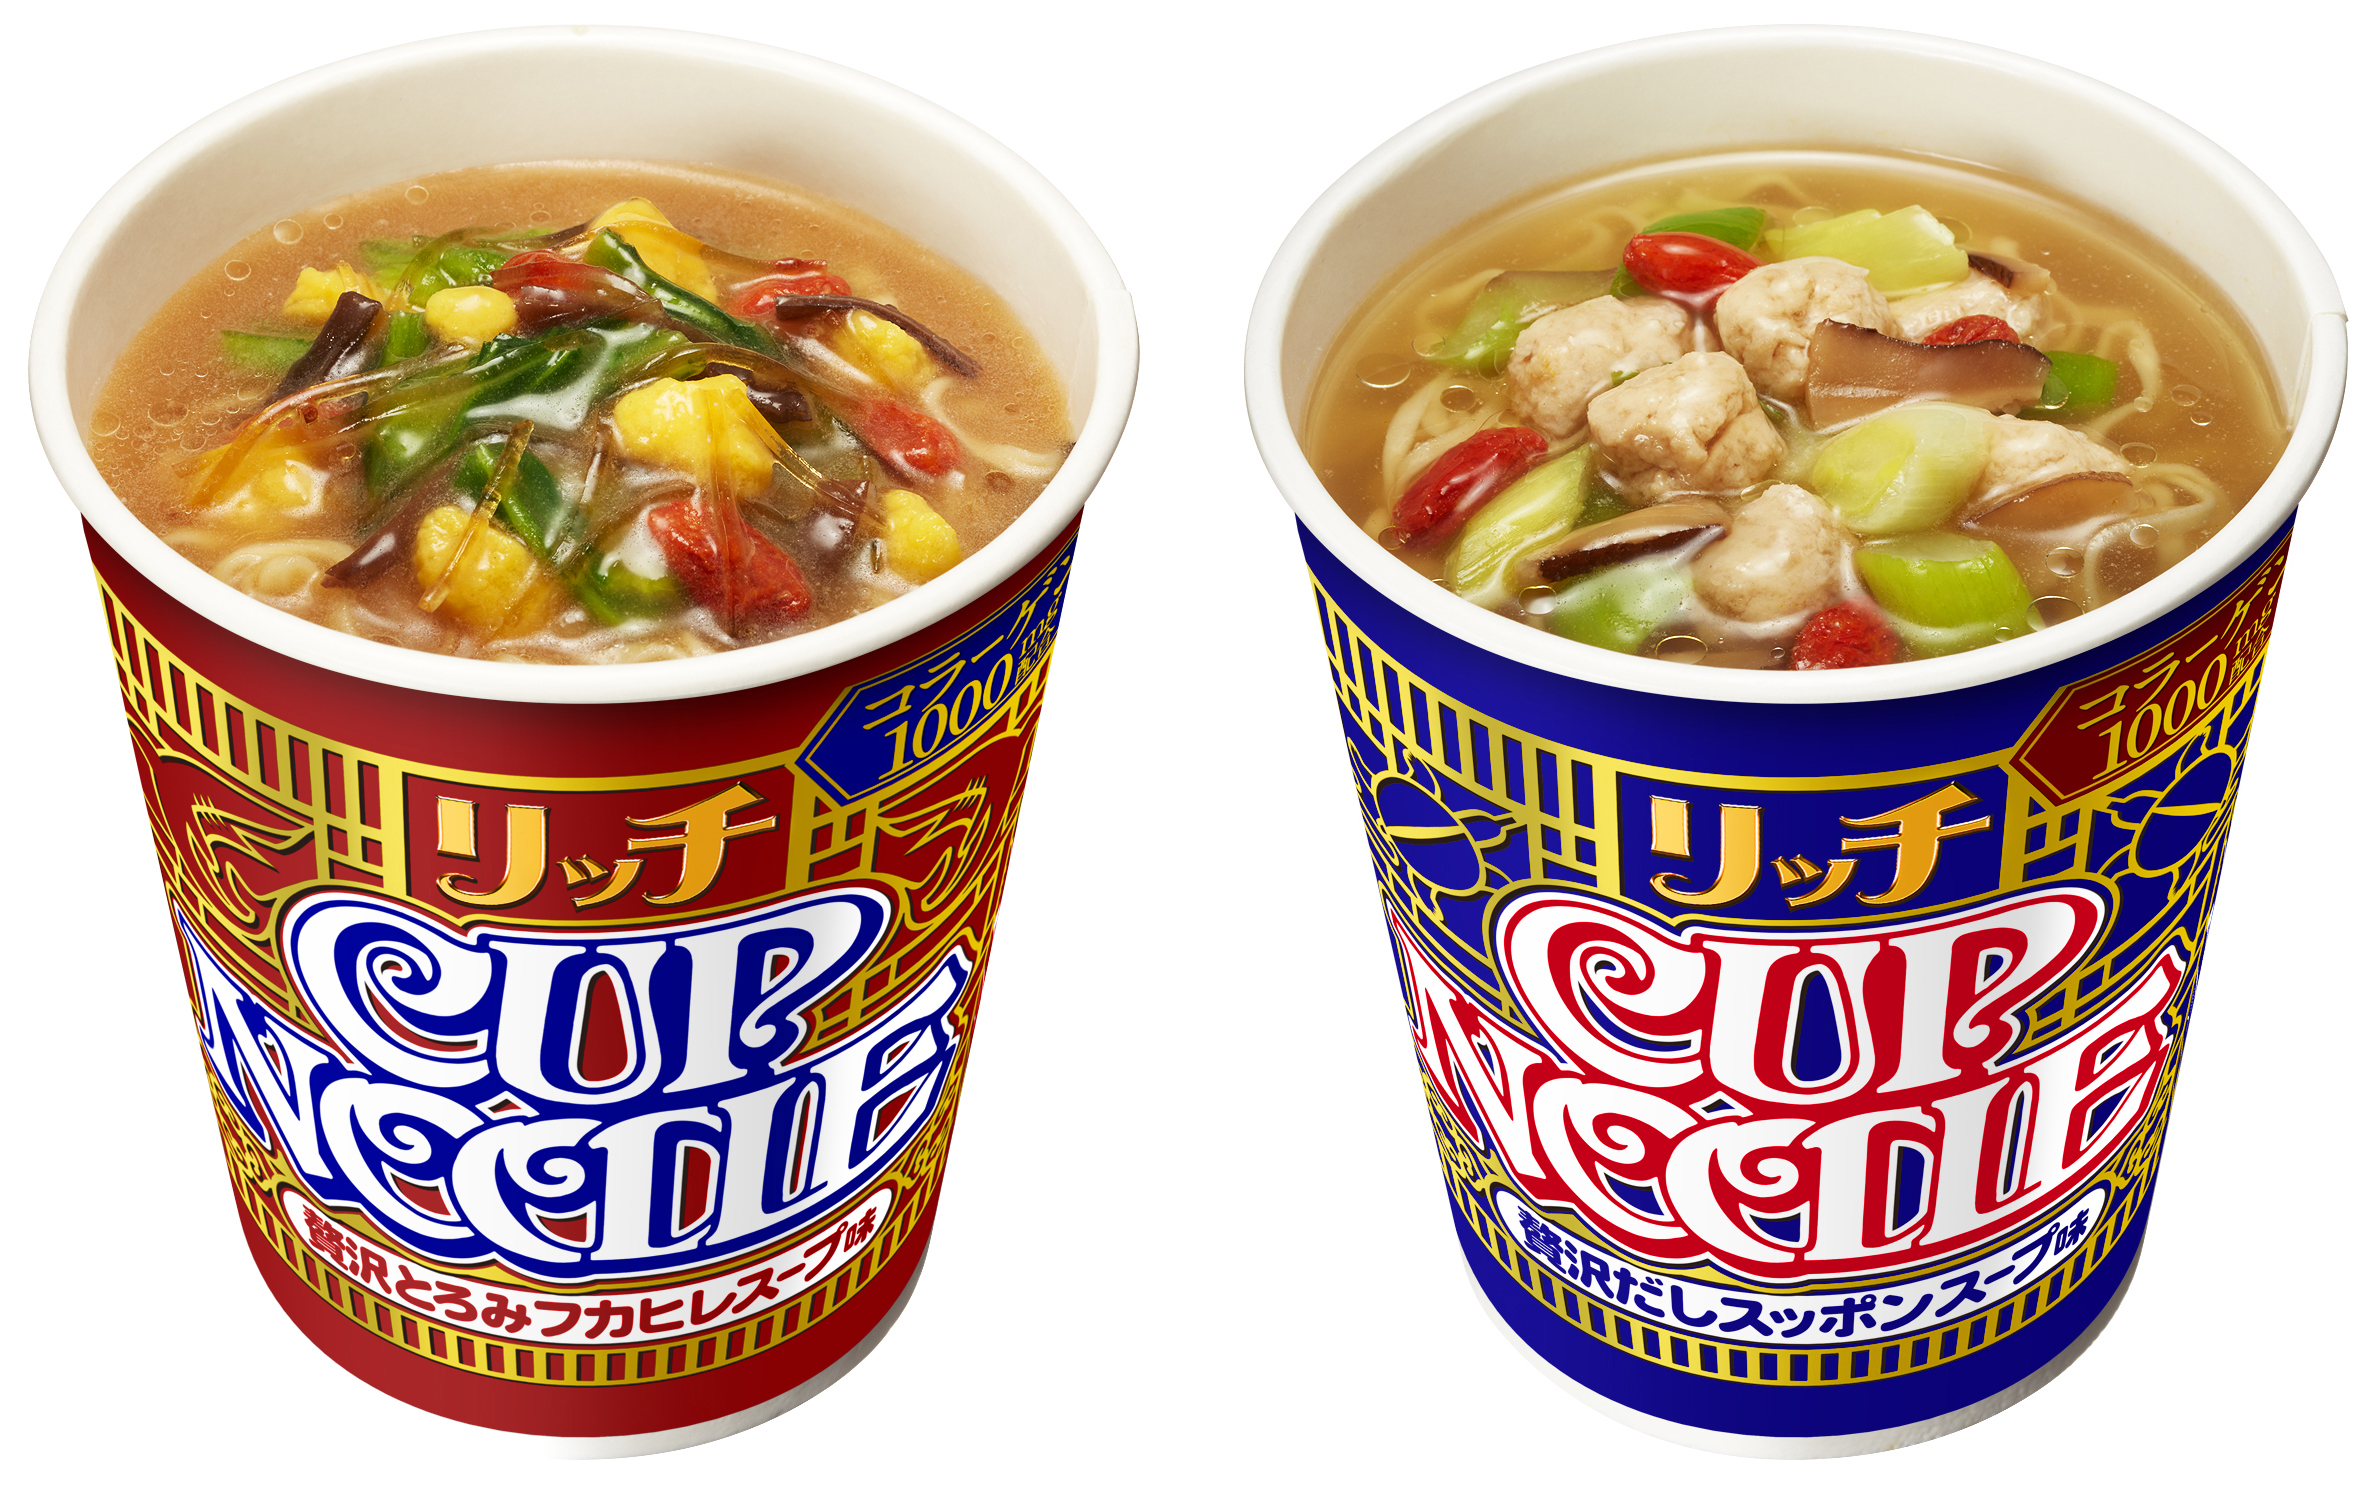 Nissin Food Products Co.'s premium line of Cup Noodles Rich will be launched in April to meet consumer demand for luxury products. | NISSIN FOOD PRODUCTS. CO.